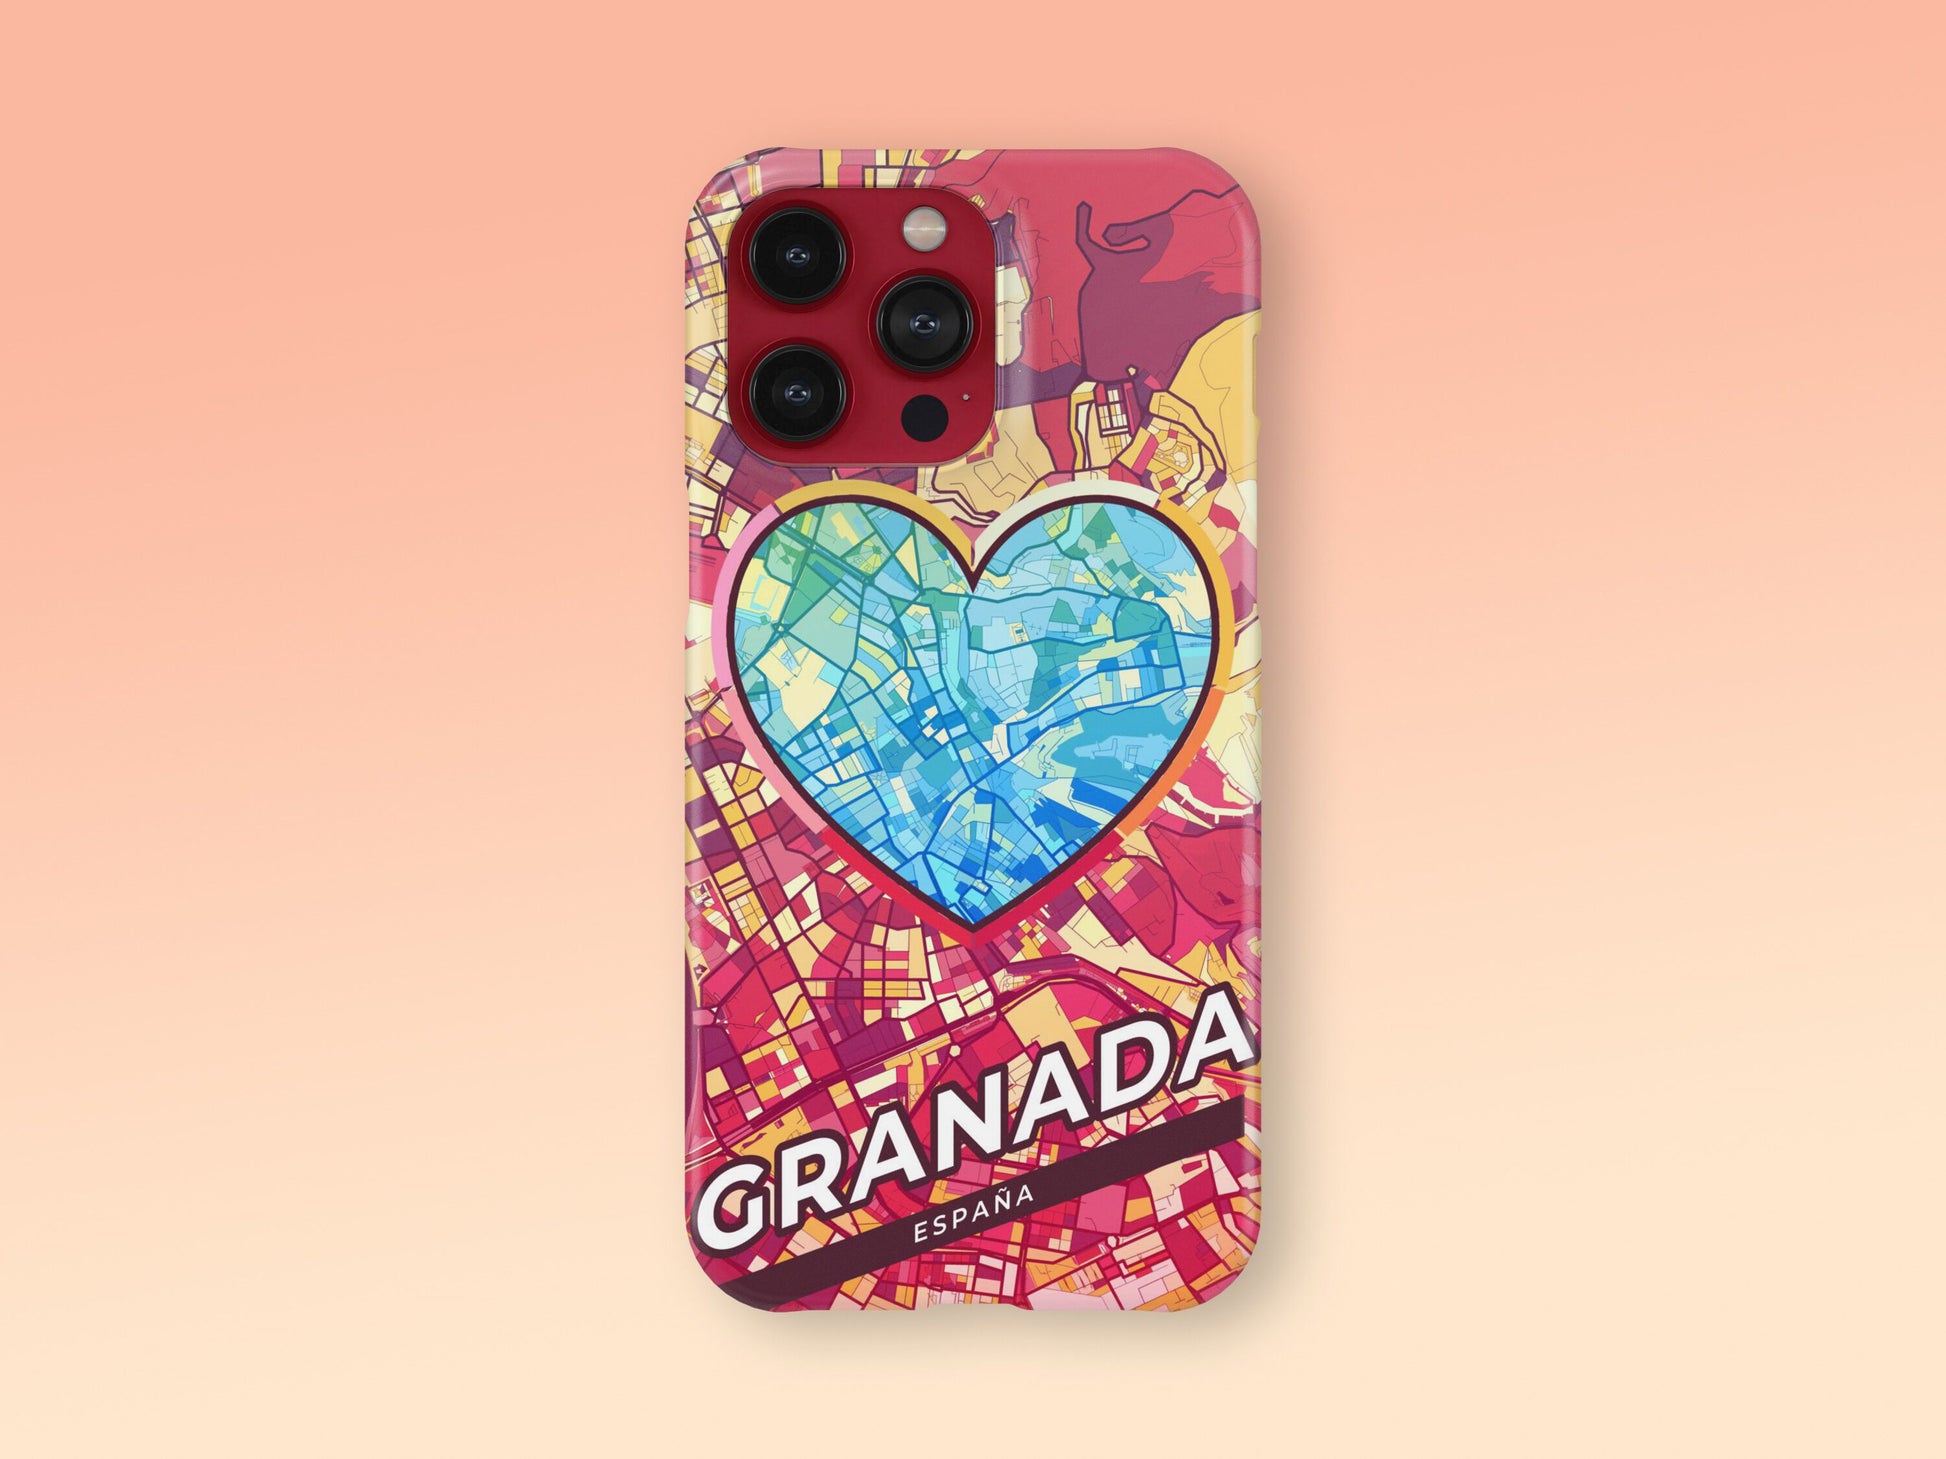 Granada Spain slim phone case with colorful icon. Birthday, wedding or housewarming gift. Couple match cases. 2